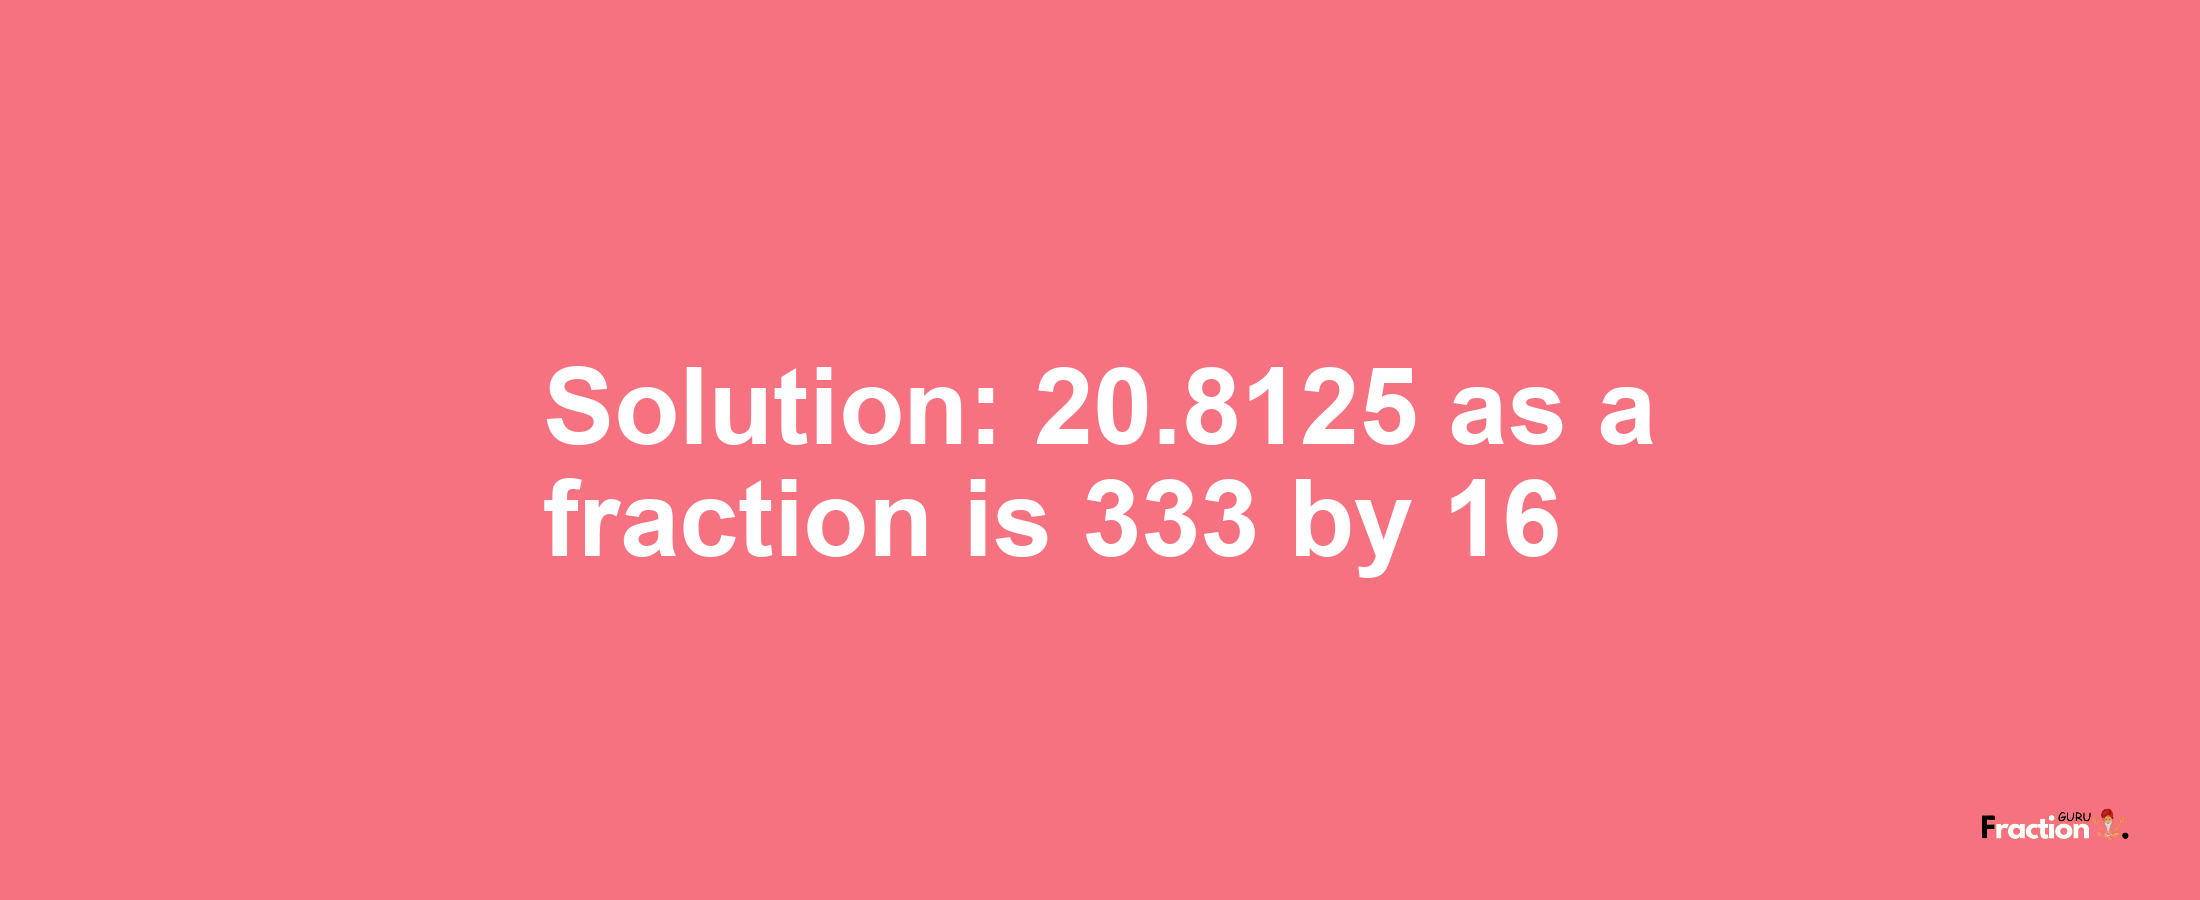 Solution:20.8125 as a fraction is 333/16